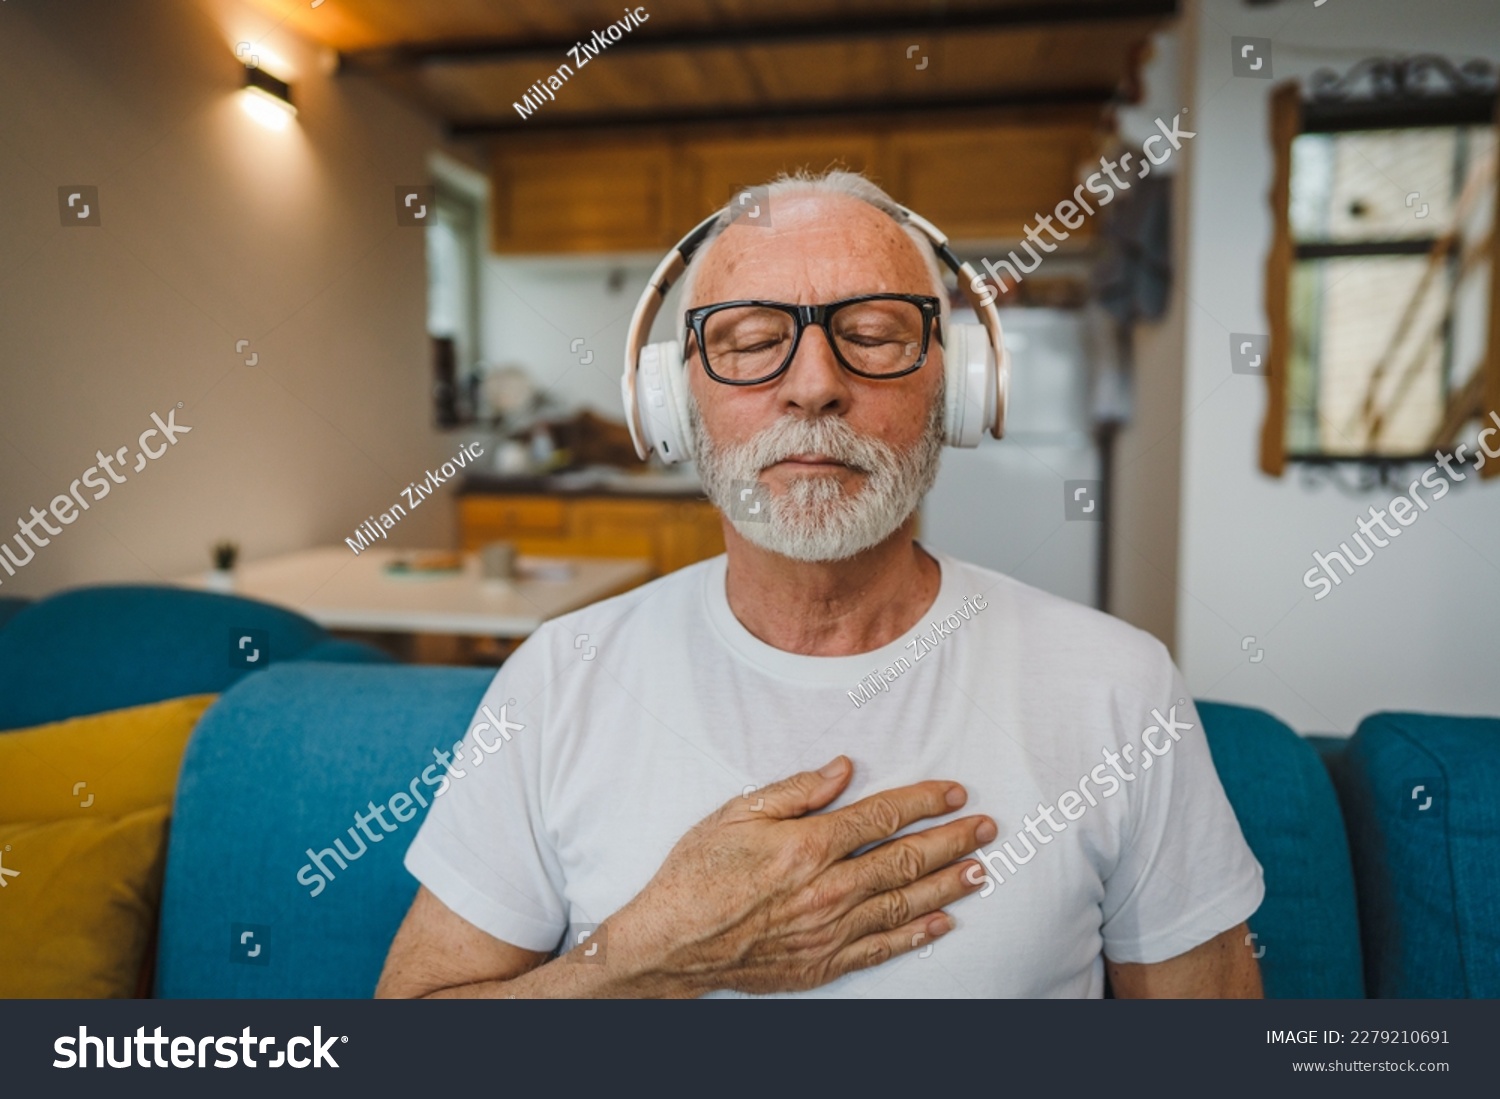 One man senior caucasian male eyes closed for guided training yoga or meditation while sitting at home with headphones self-care practice real people well-being inner peace and balance concept #2279210691